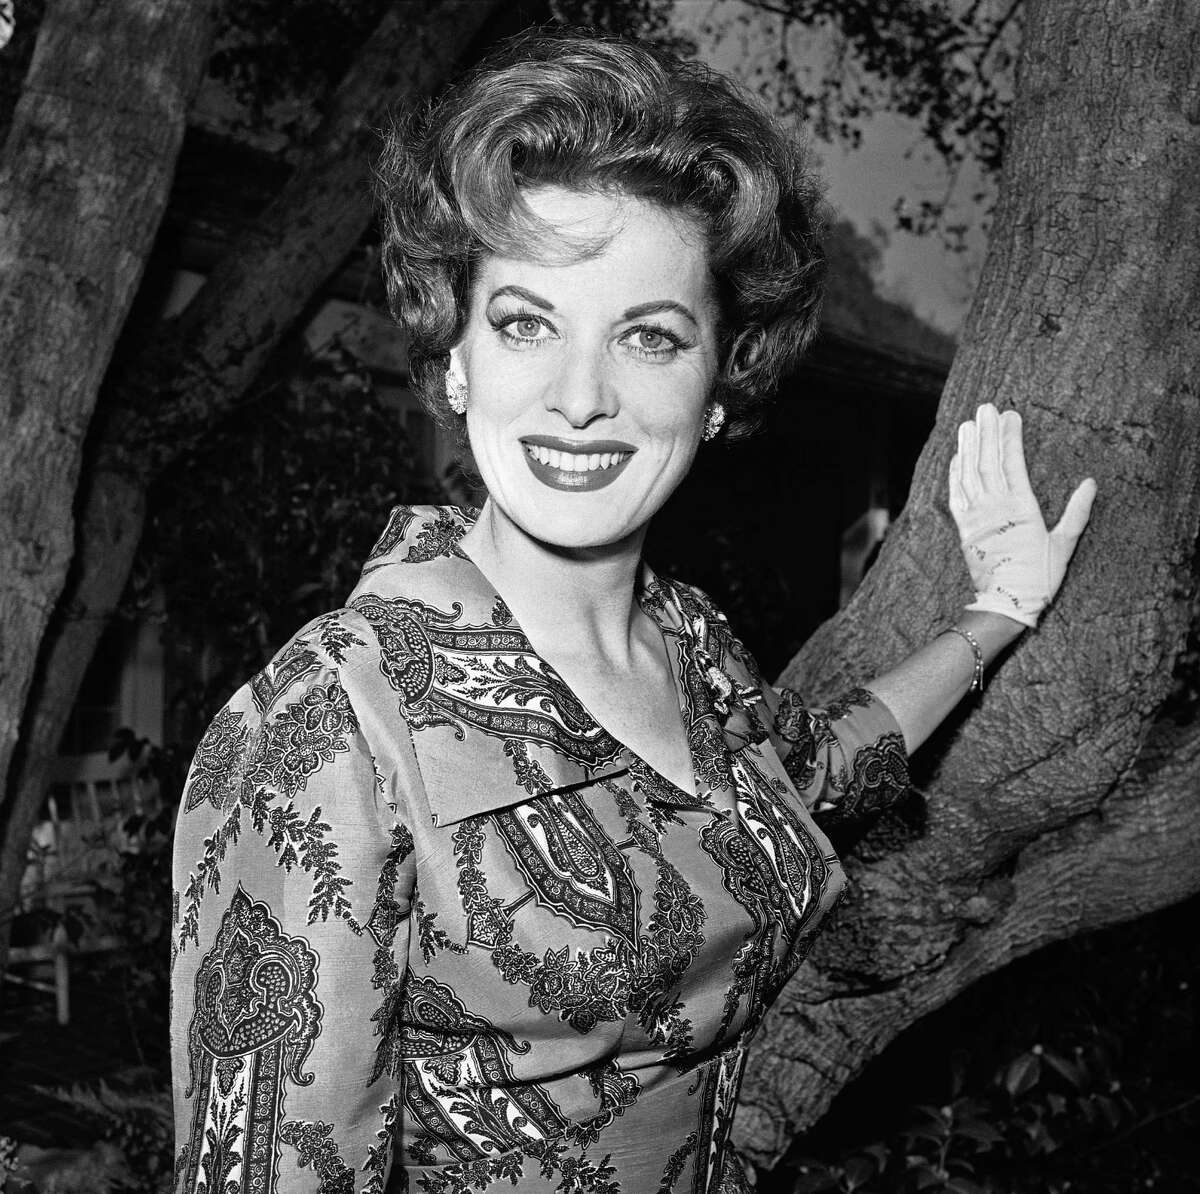 Maureen O'Hara in 1960. She was in such classics as "The Quiet Man" and How Green Was My Valley." ﻿